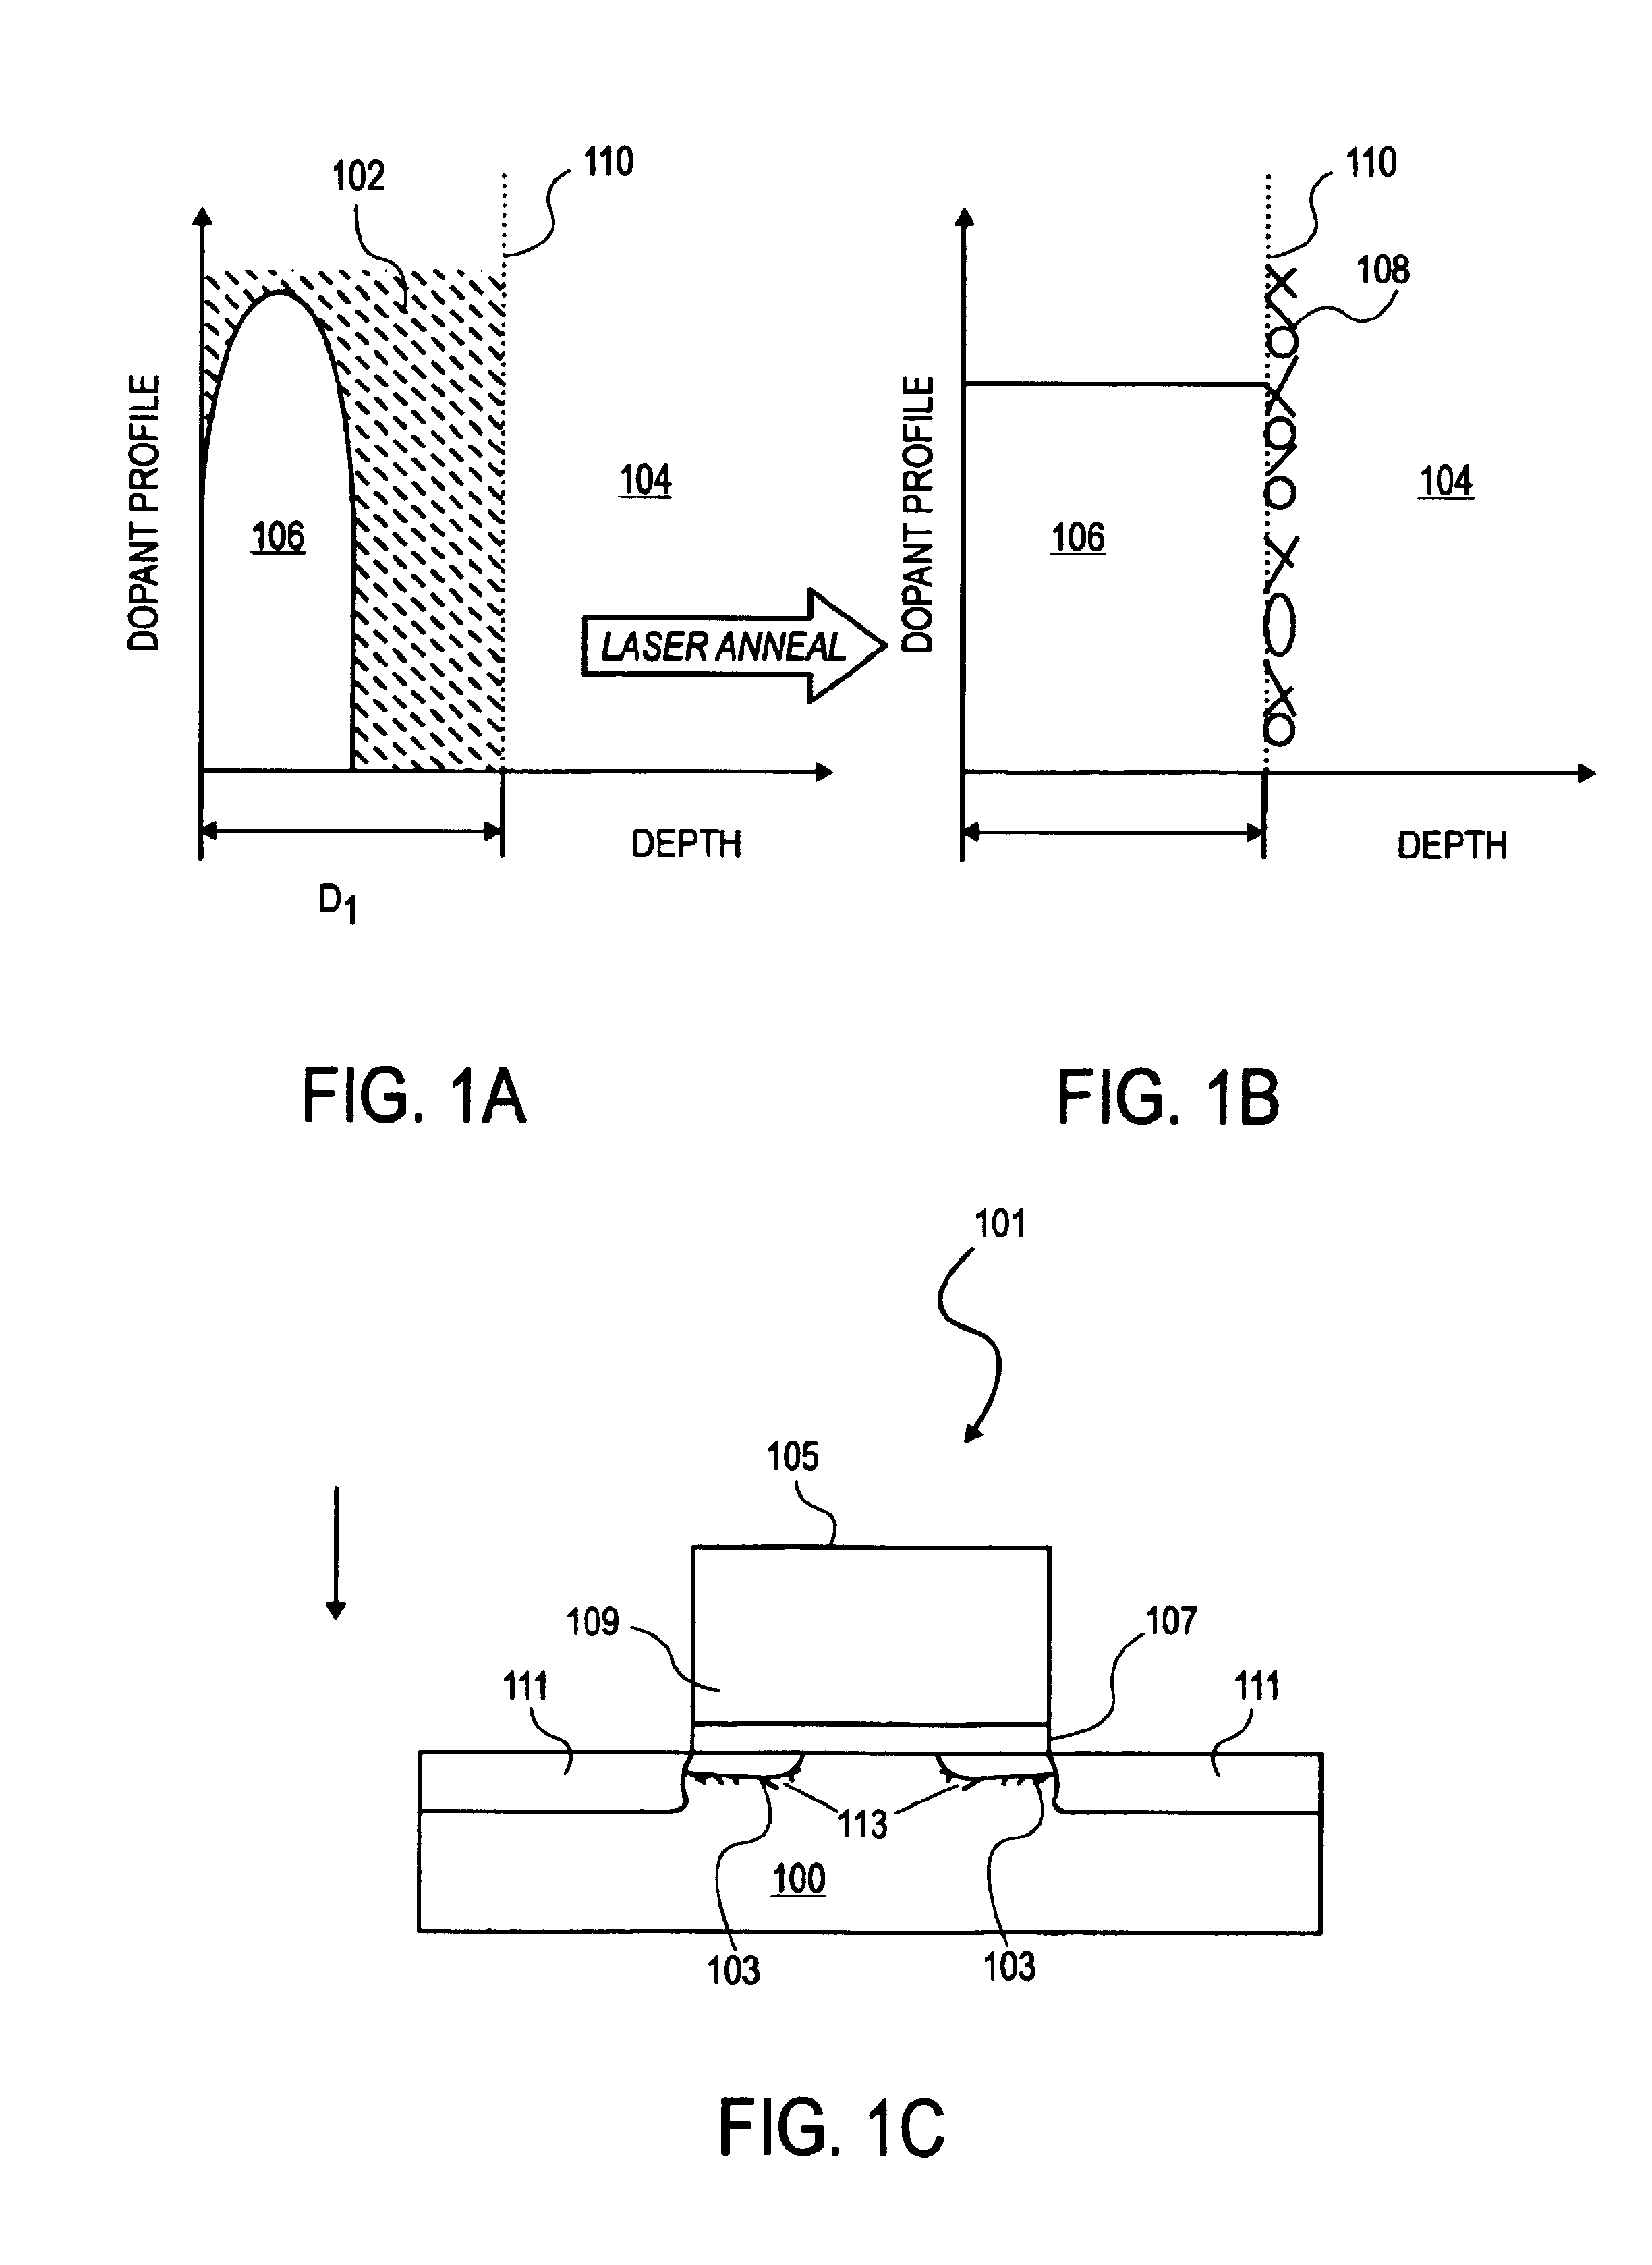 Method of forming a shallow junction